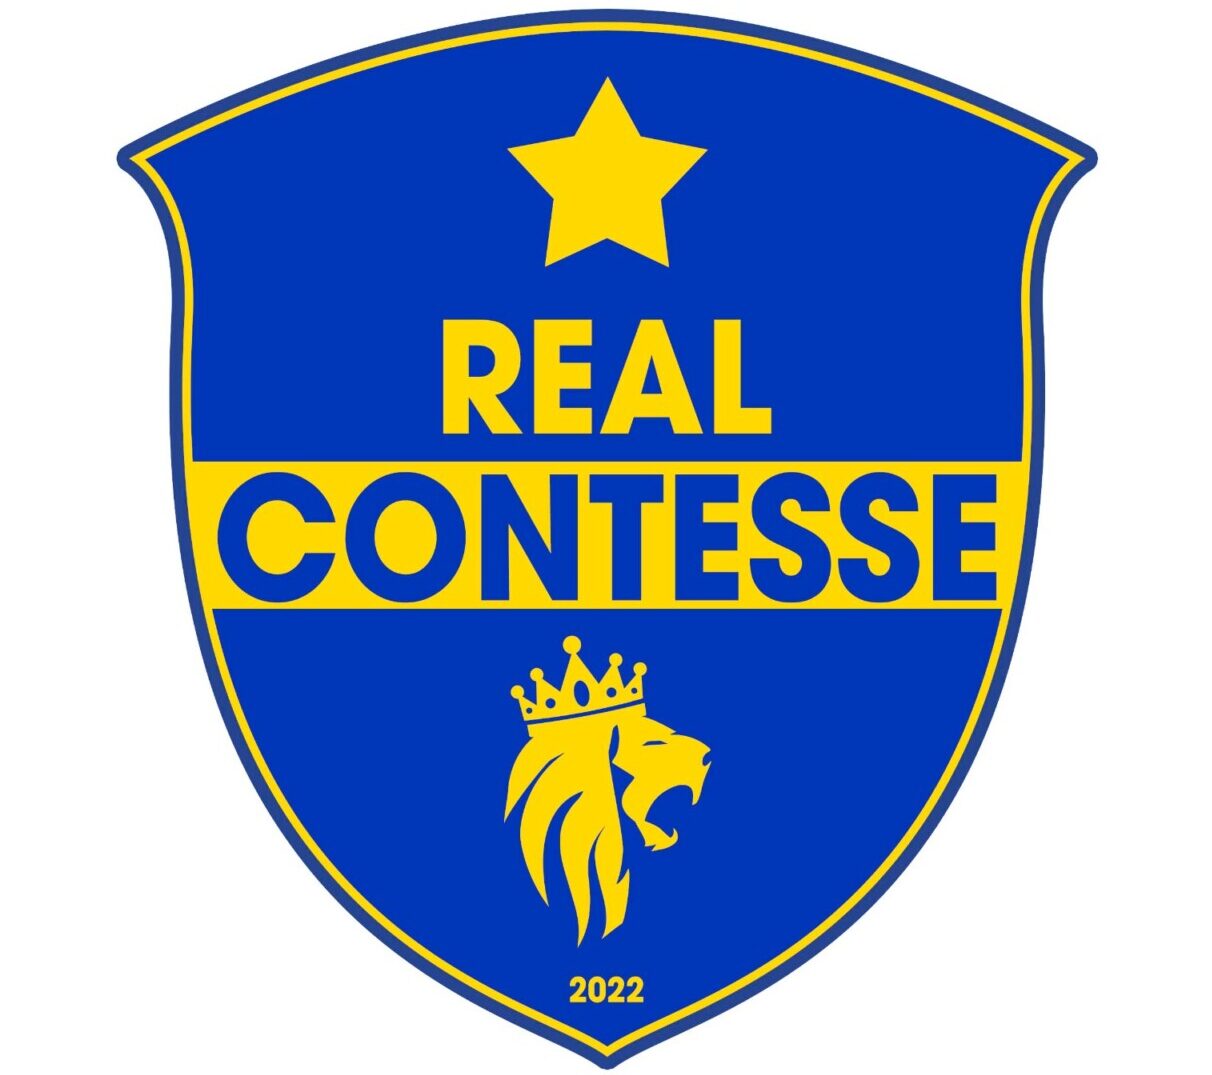 Real Contesse